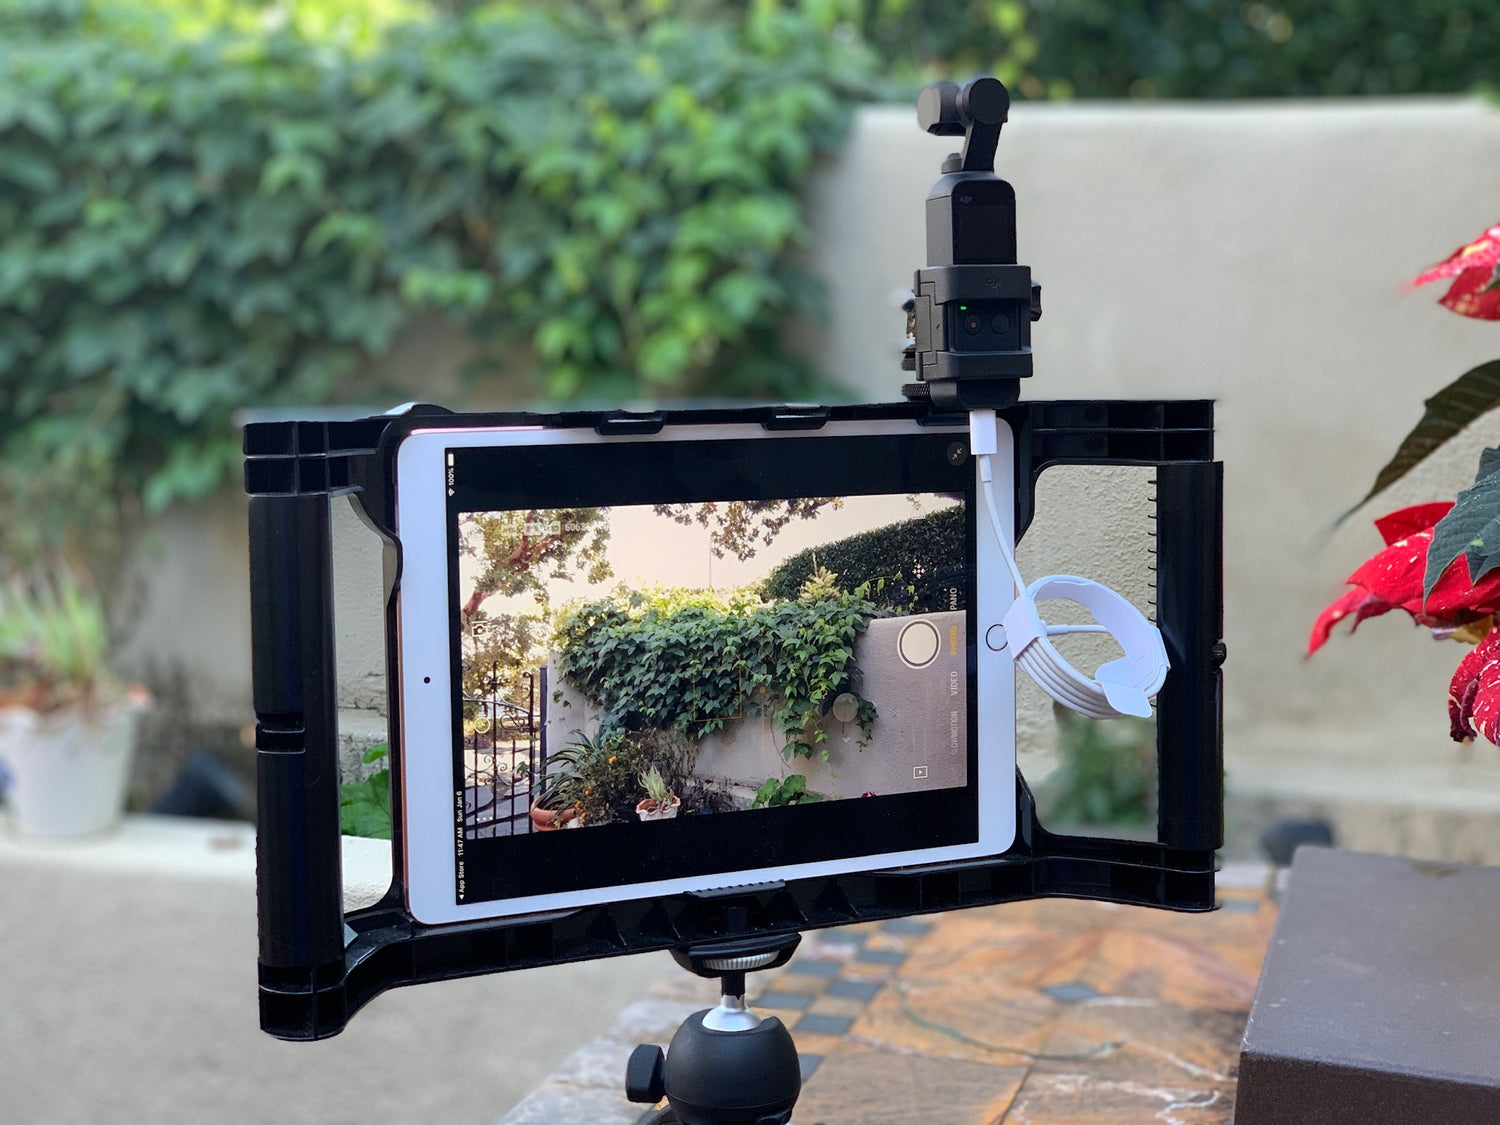 Using the Osmo Pocket with your iOgrapher and iPad/iPhone